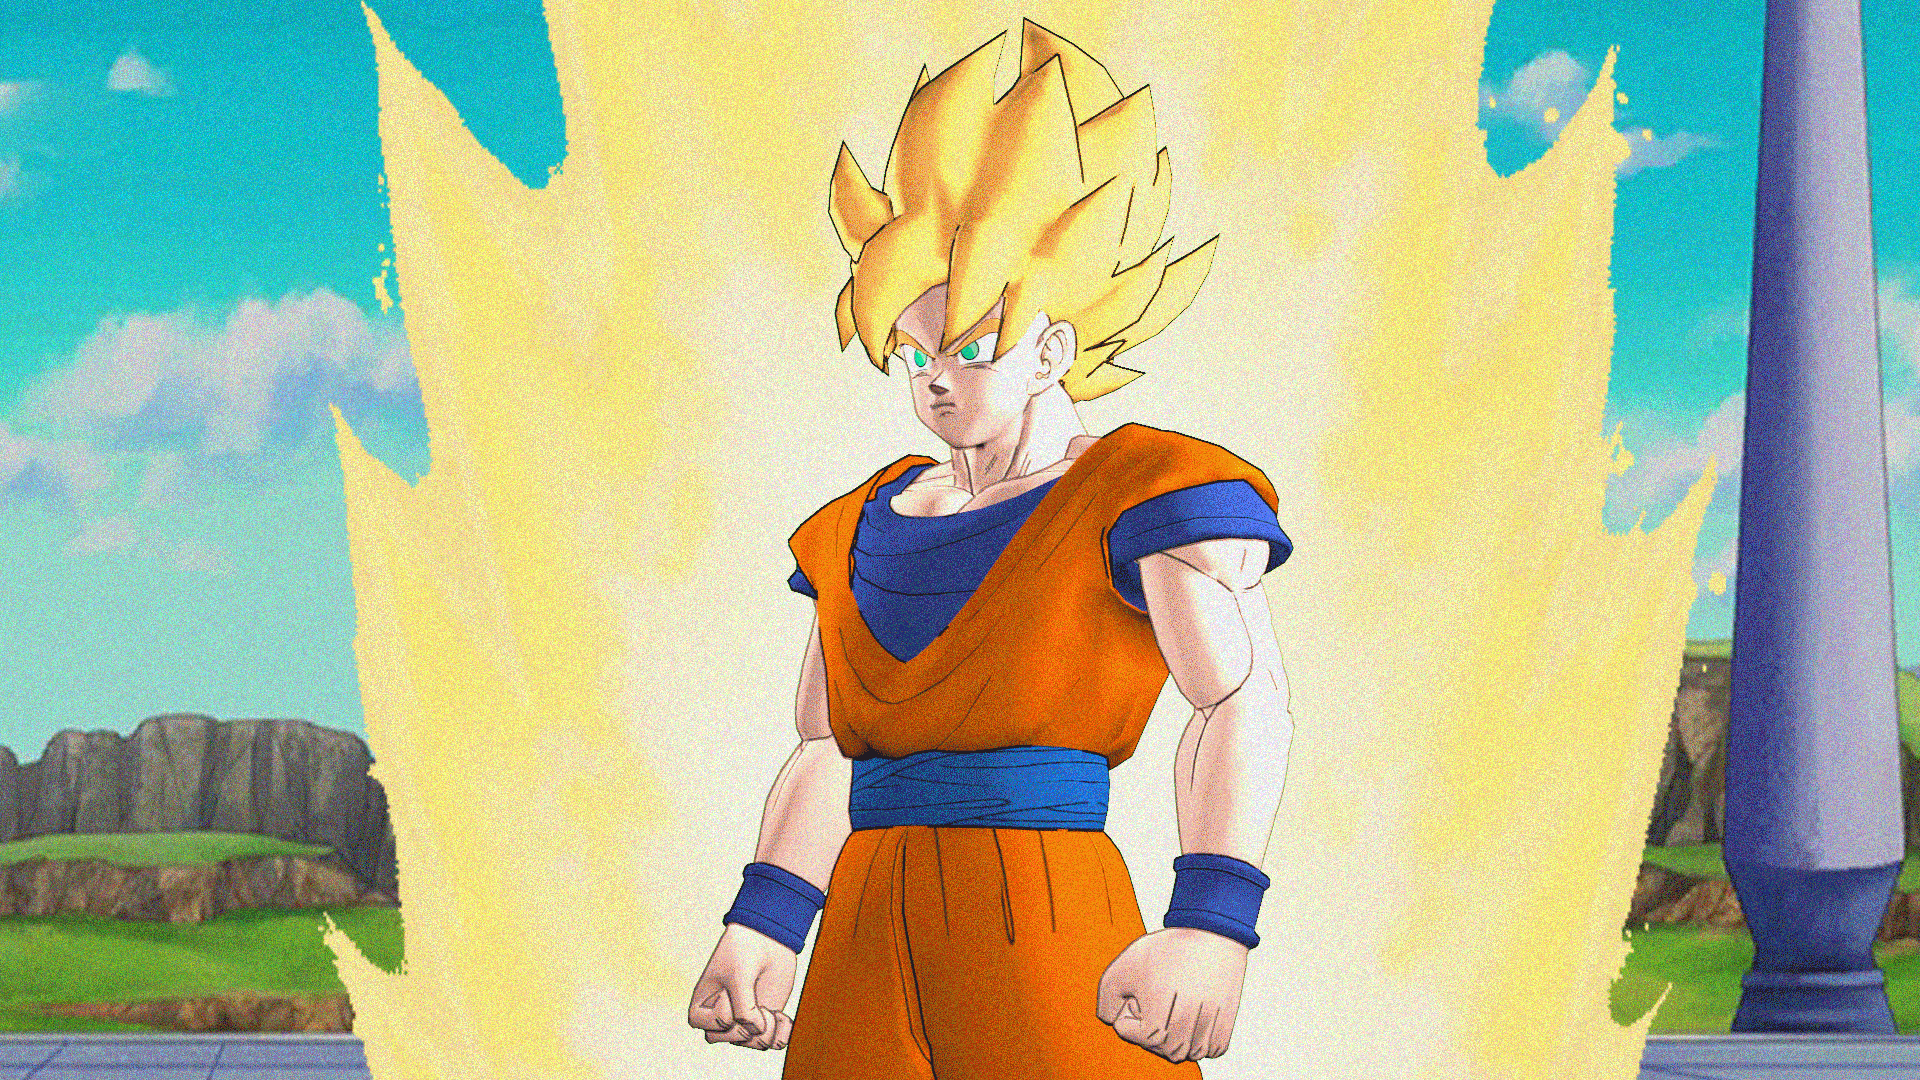 Flash, Animated GIFS and Wallpapers on Dragonball-Z-Club - DeviantArt